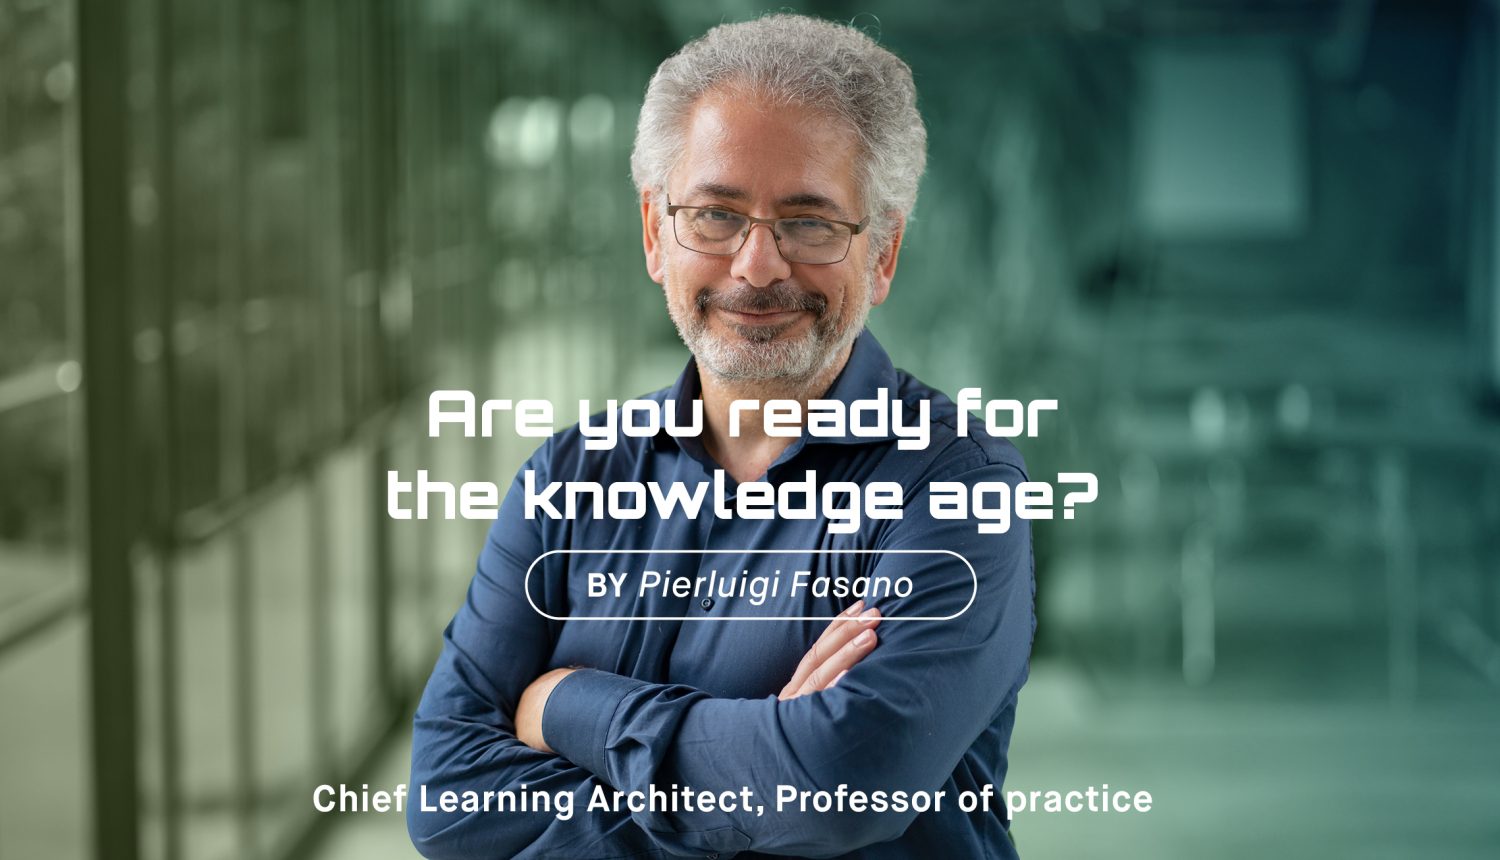 Are you ready for the knowledge age?